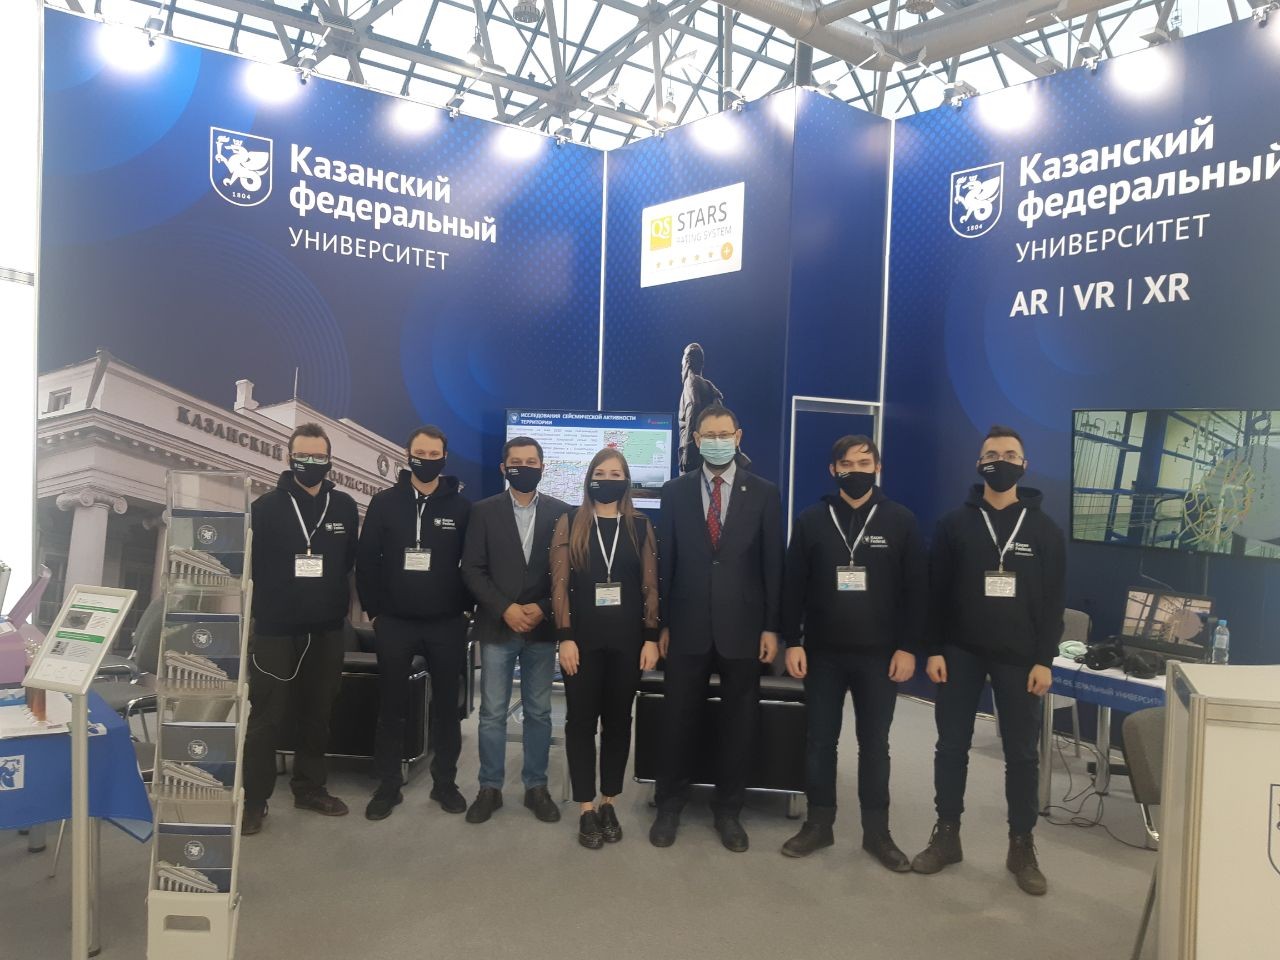 University research showcased at Vuzpromexpo 2020 in Moscow ,Vuzpromexpo, exhibition, IGPT